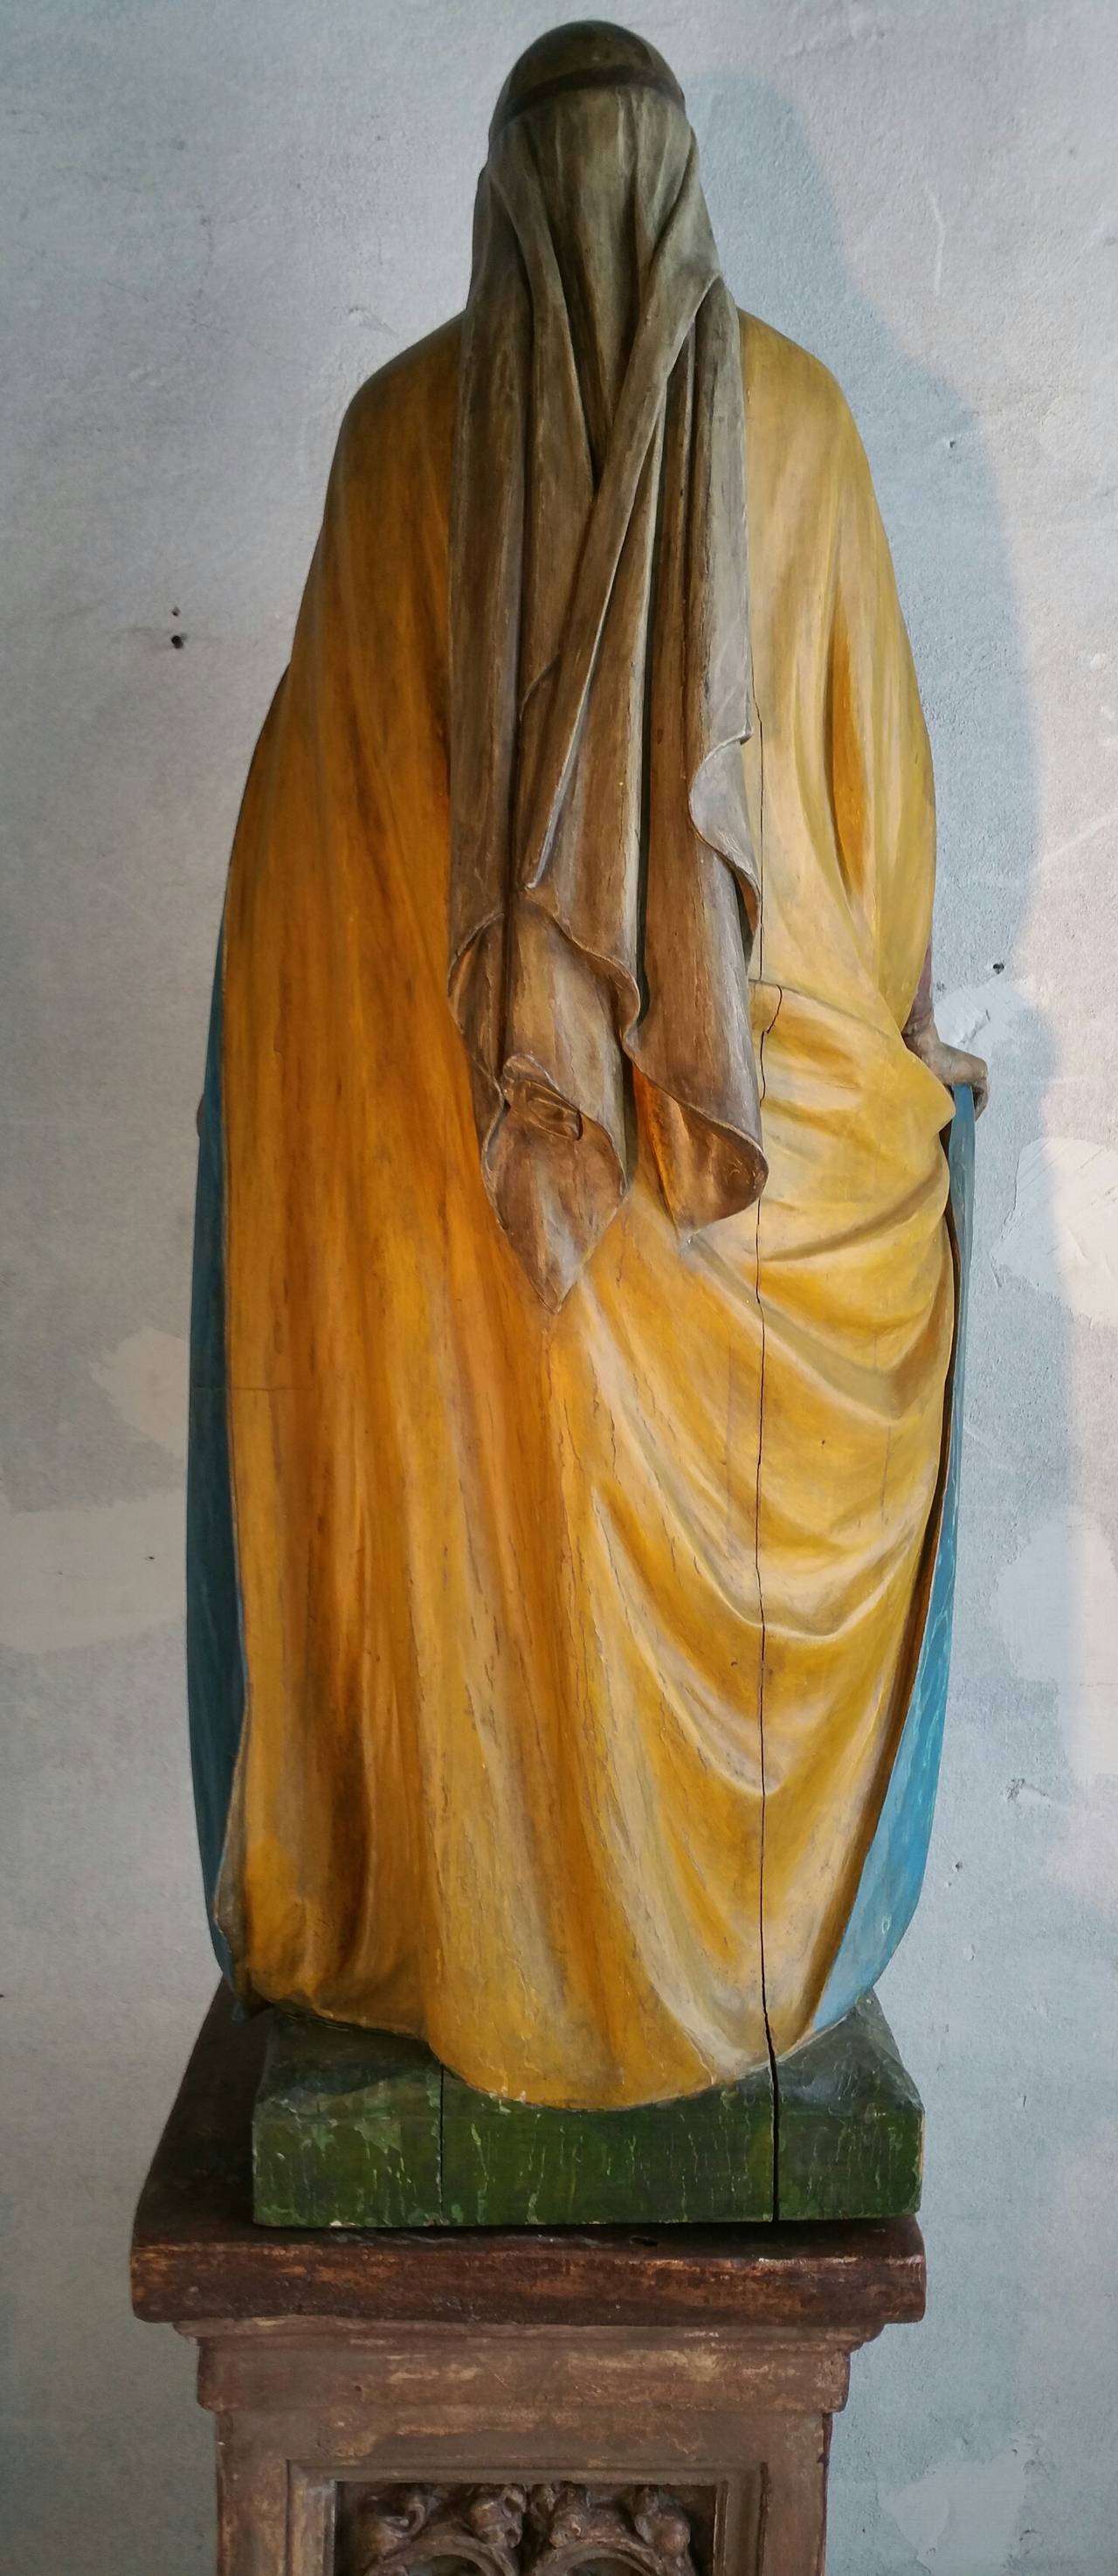 Monumental Carved Wood Statue of St, Elizabeth... Carved in Buffalo N,Y. in 1895,, by Heinrich Schmitt,, Beautifully exicuted and hand painted..signed and dated.